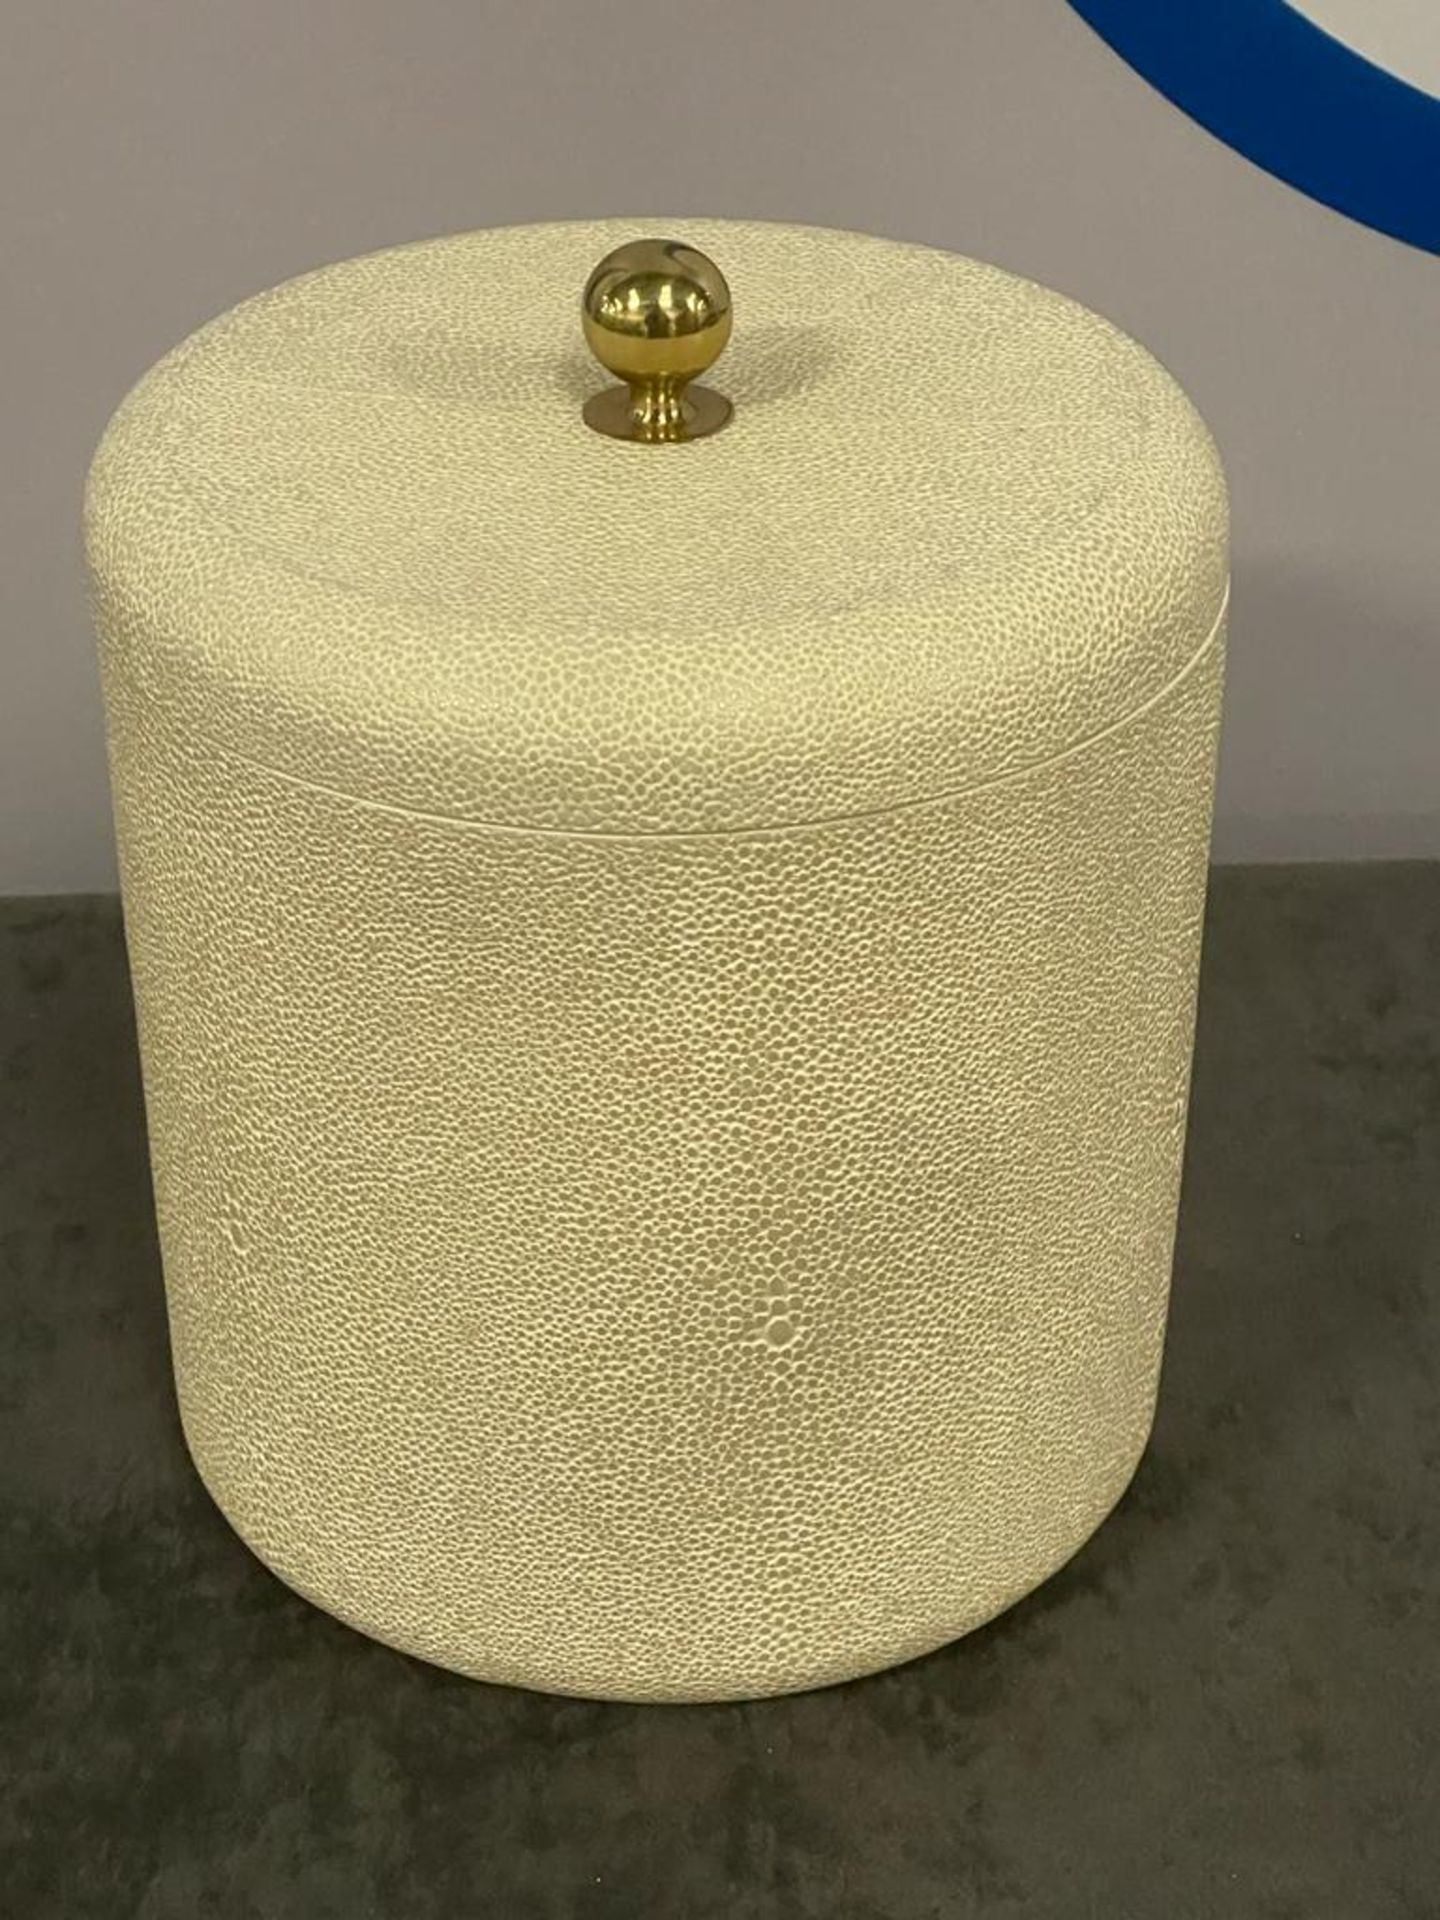 Aerin Shagreen Ice Bucket A Rounded, Stylish Ice Bucket Made Of Shagreen, With A Brass Knob On The